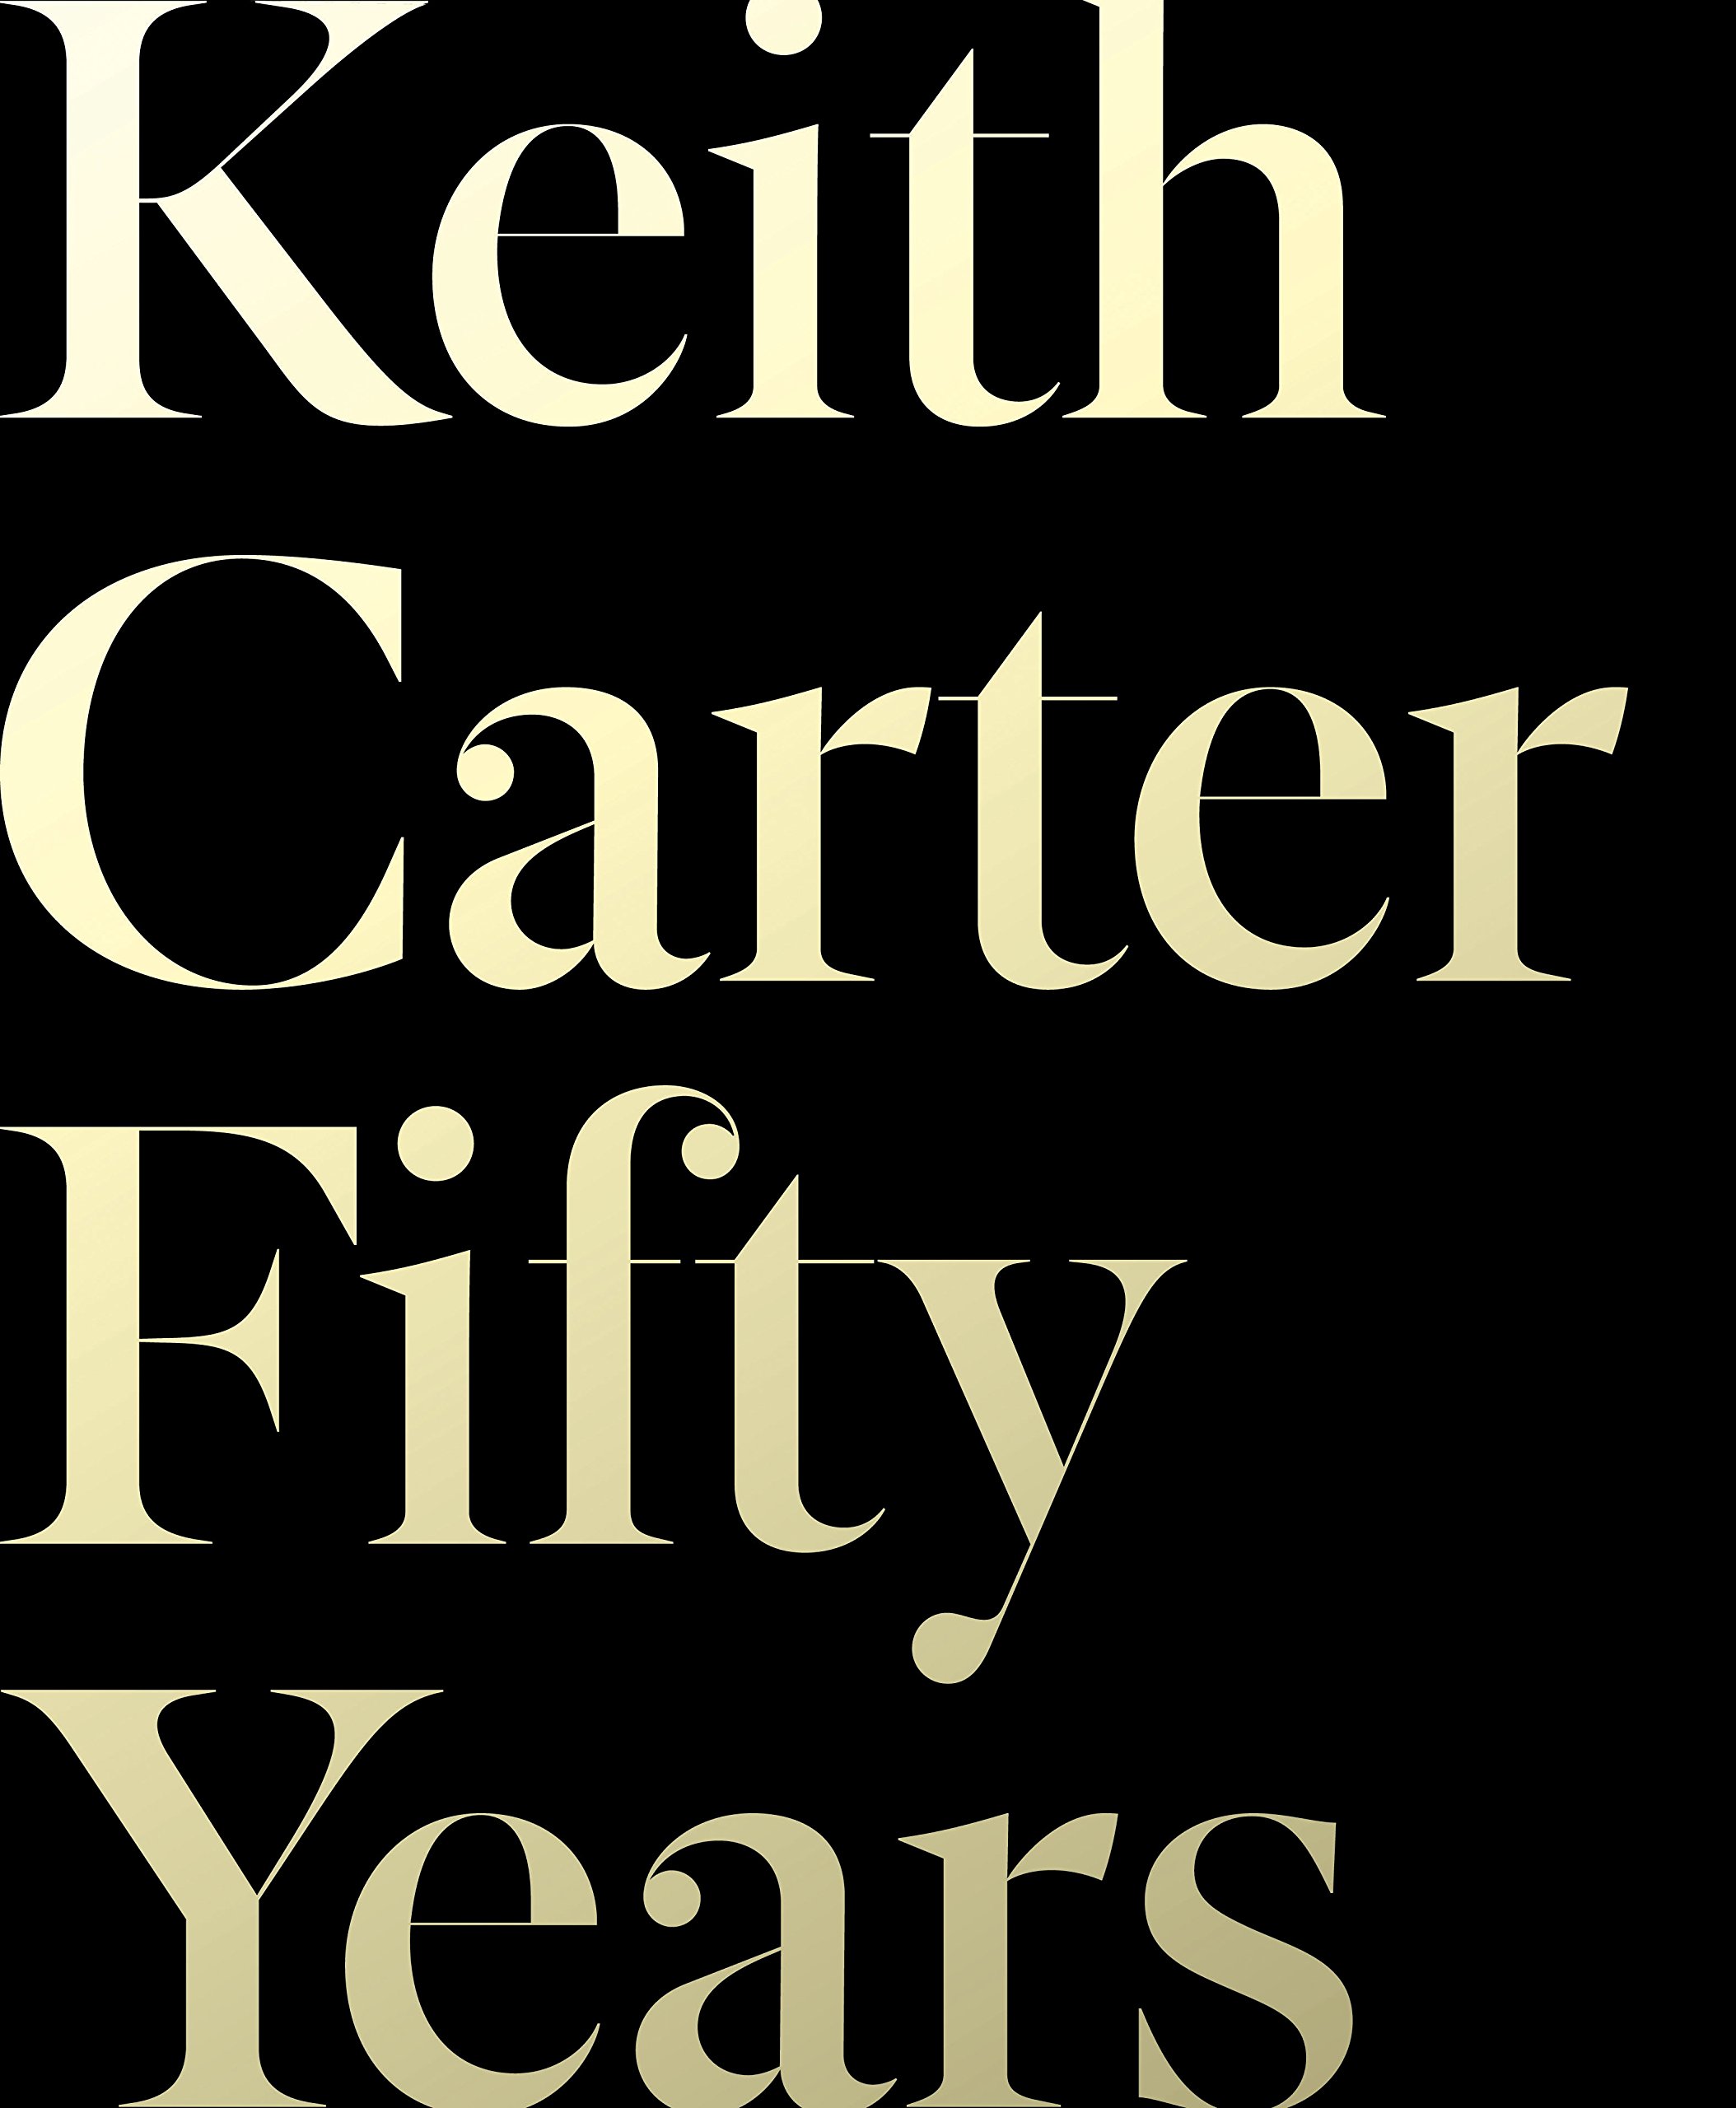 Keith Carter: Fifty Years | Keith Carter